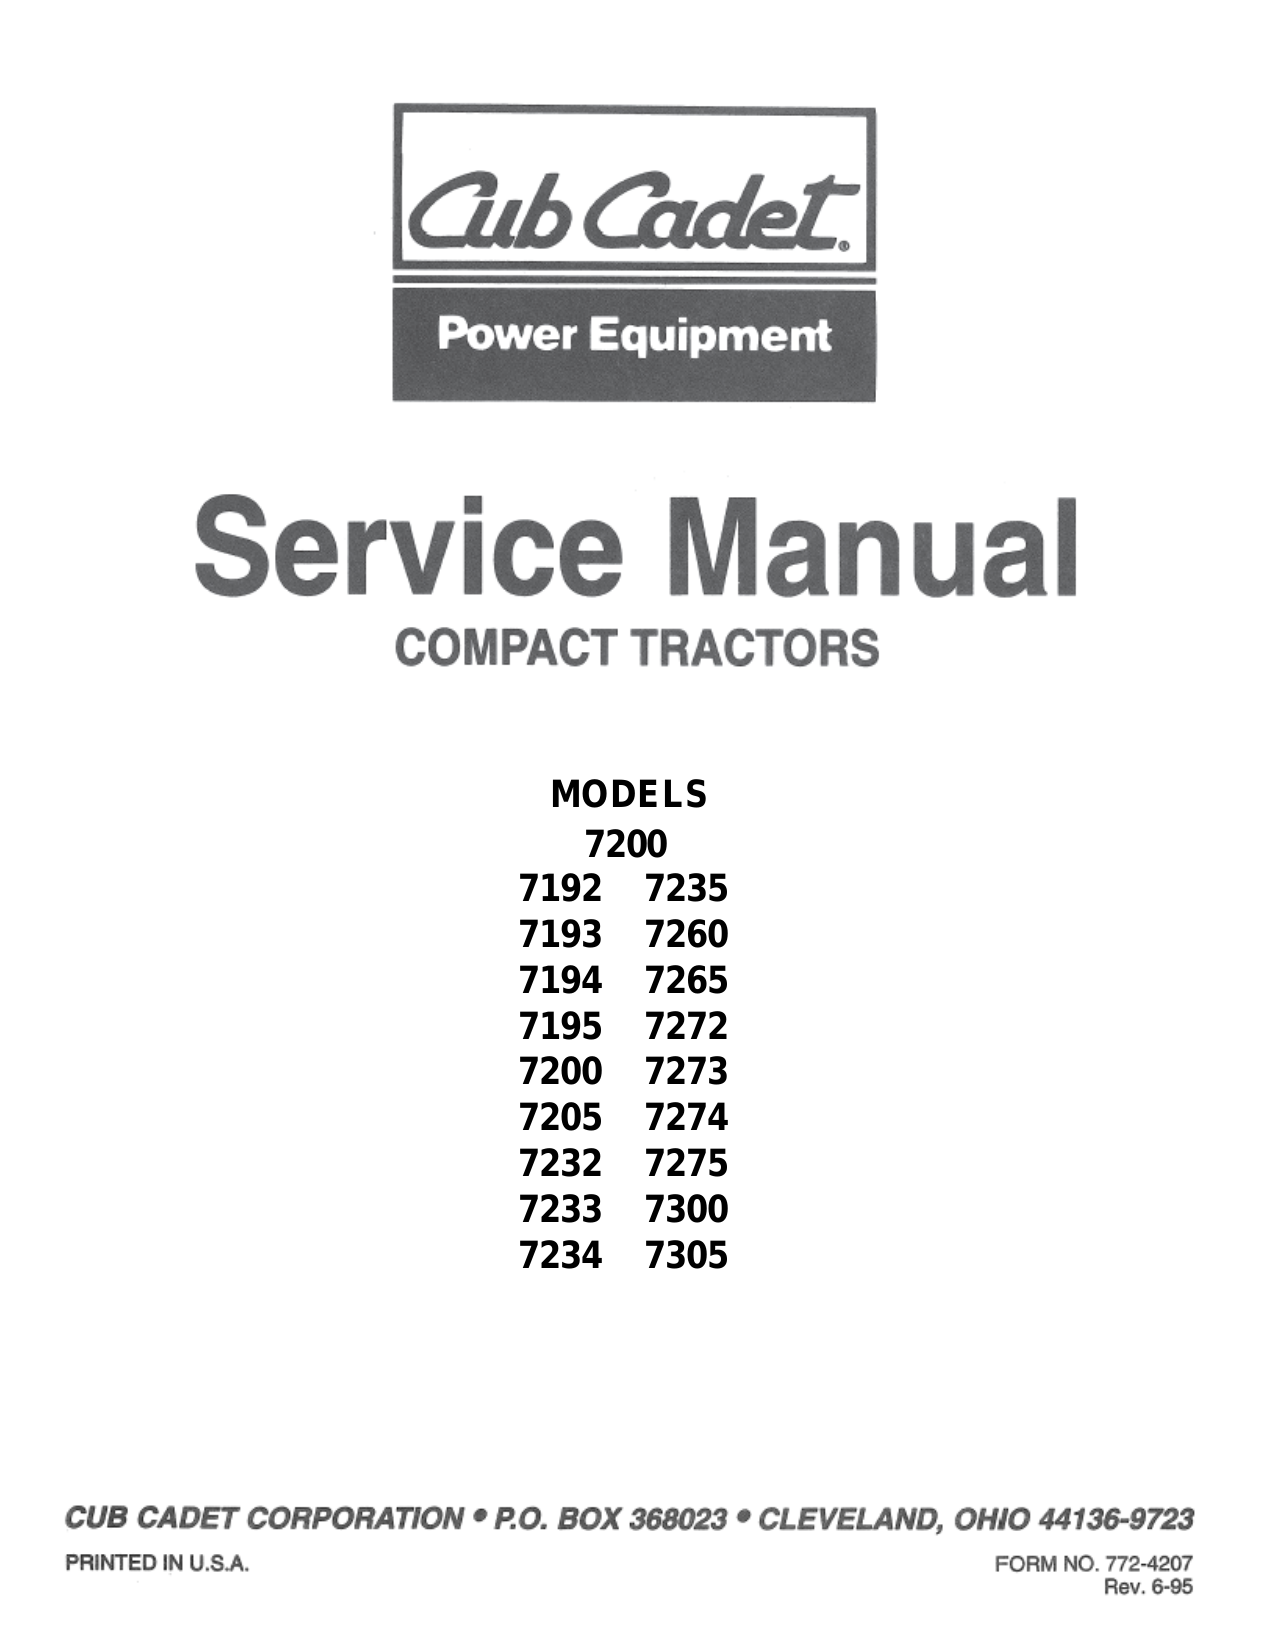 1996-2003 Cub Cadet™ 7192, 7193, 7194, 7195, 7200, 7205, 7232, 7233, 7234 compact tractor service manual Preview image 2